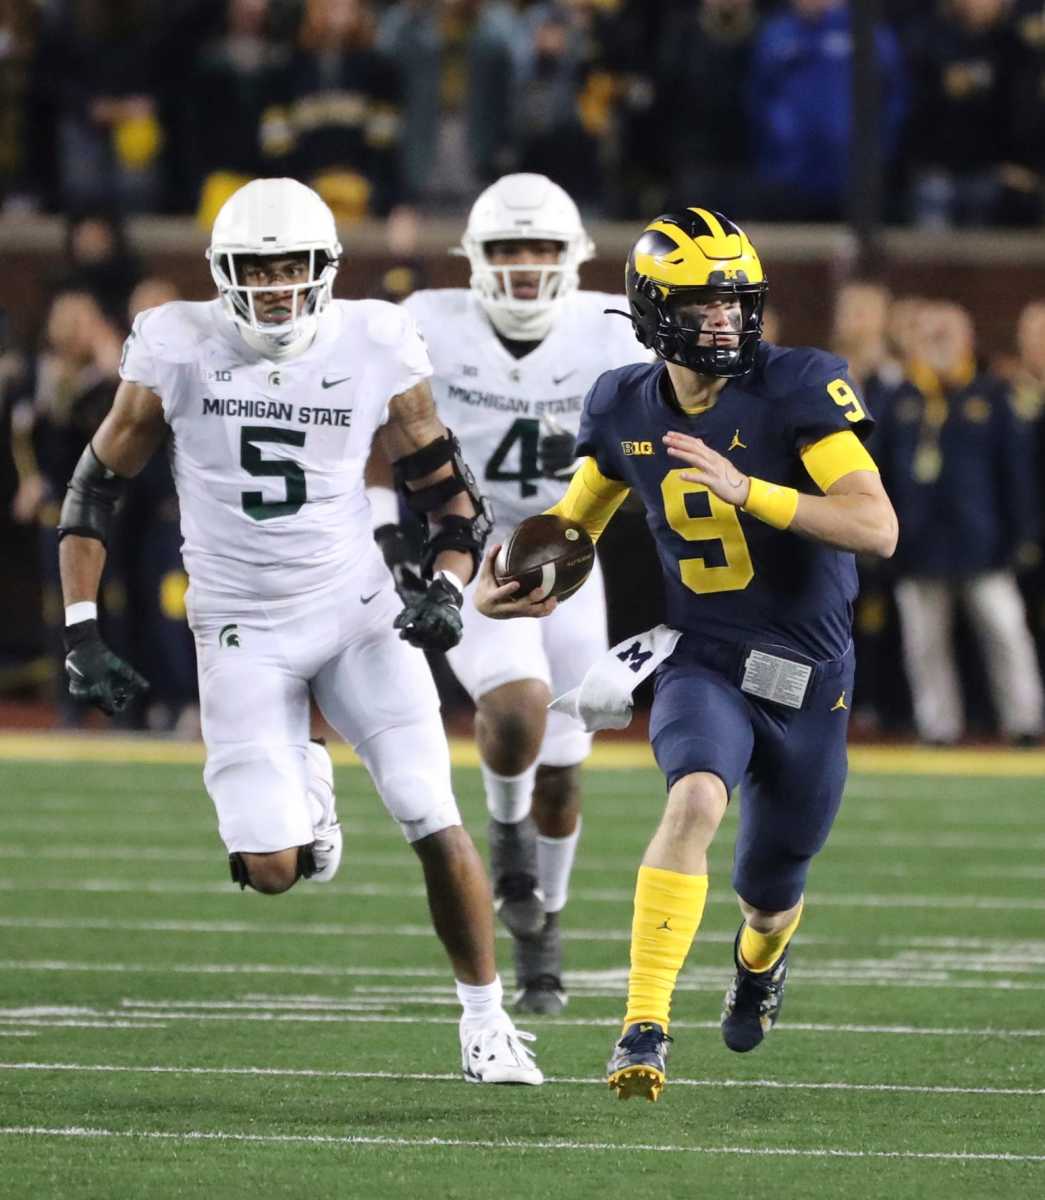 Michigan QB JJ McCarthy is seen here scrambling for a first down against Michigan State. Photo by Kirthmon F. Dozier of the Detroit Free Press